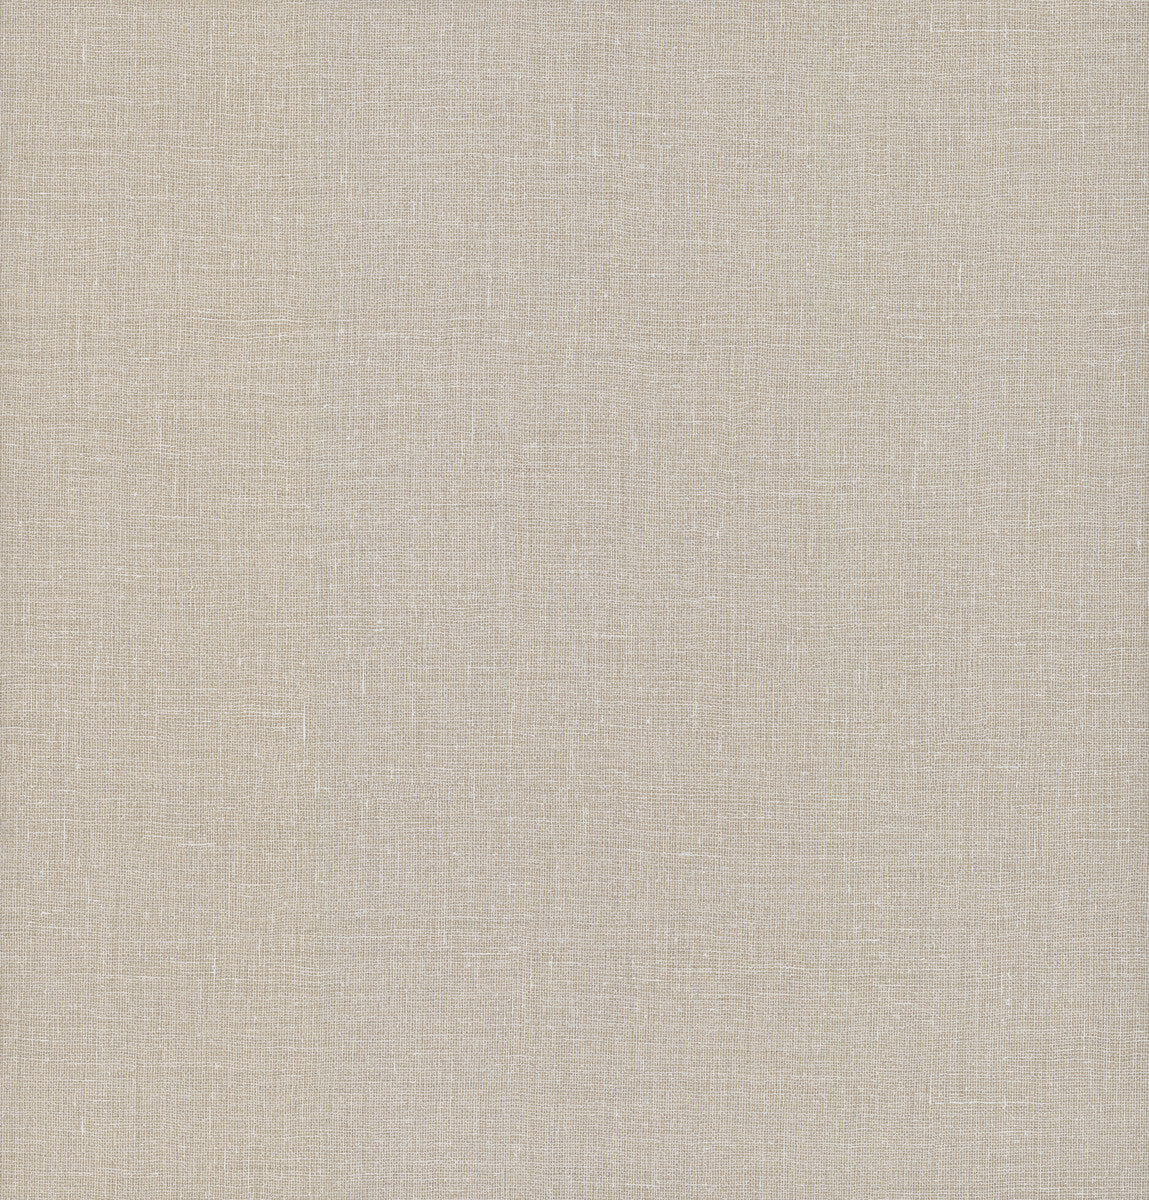 Artistic Abstracts Gesso Weave Wallpaper - Brown